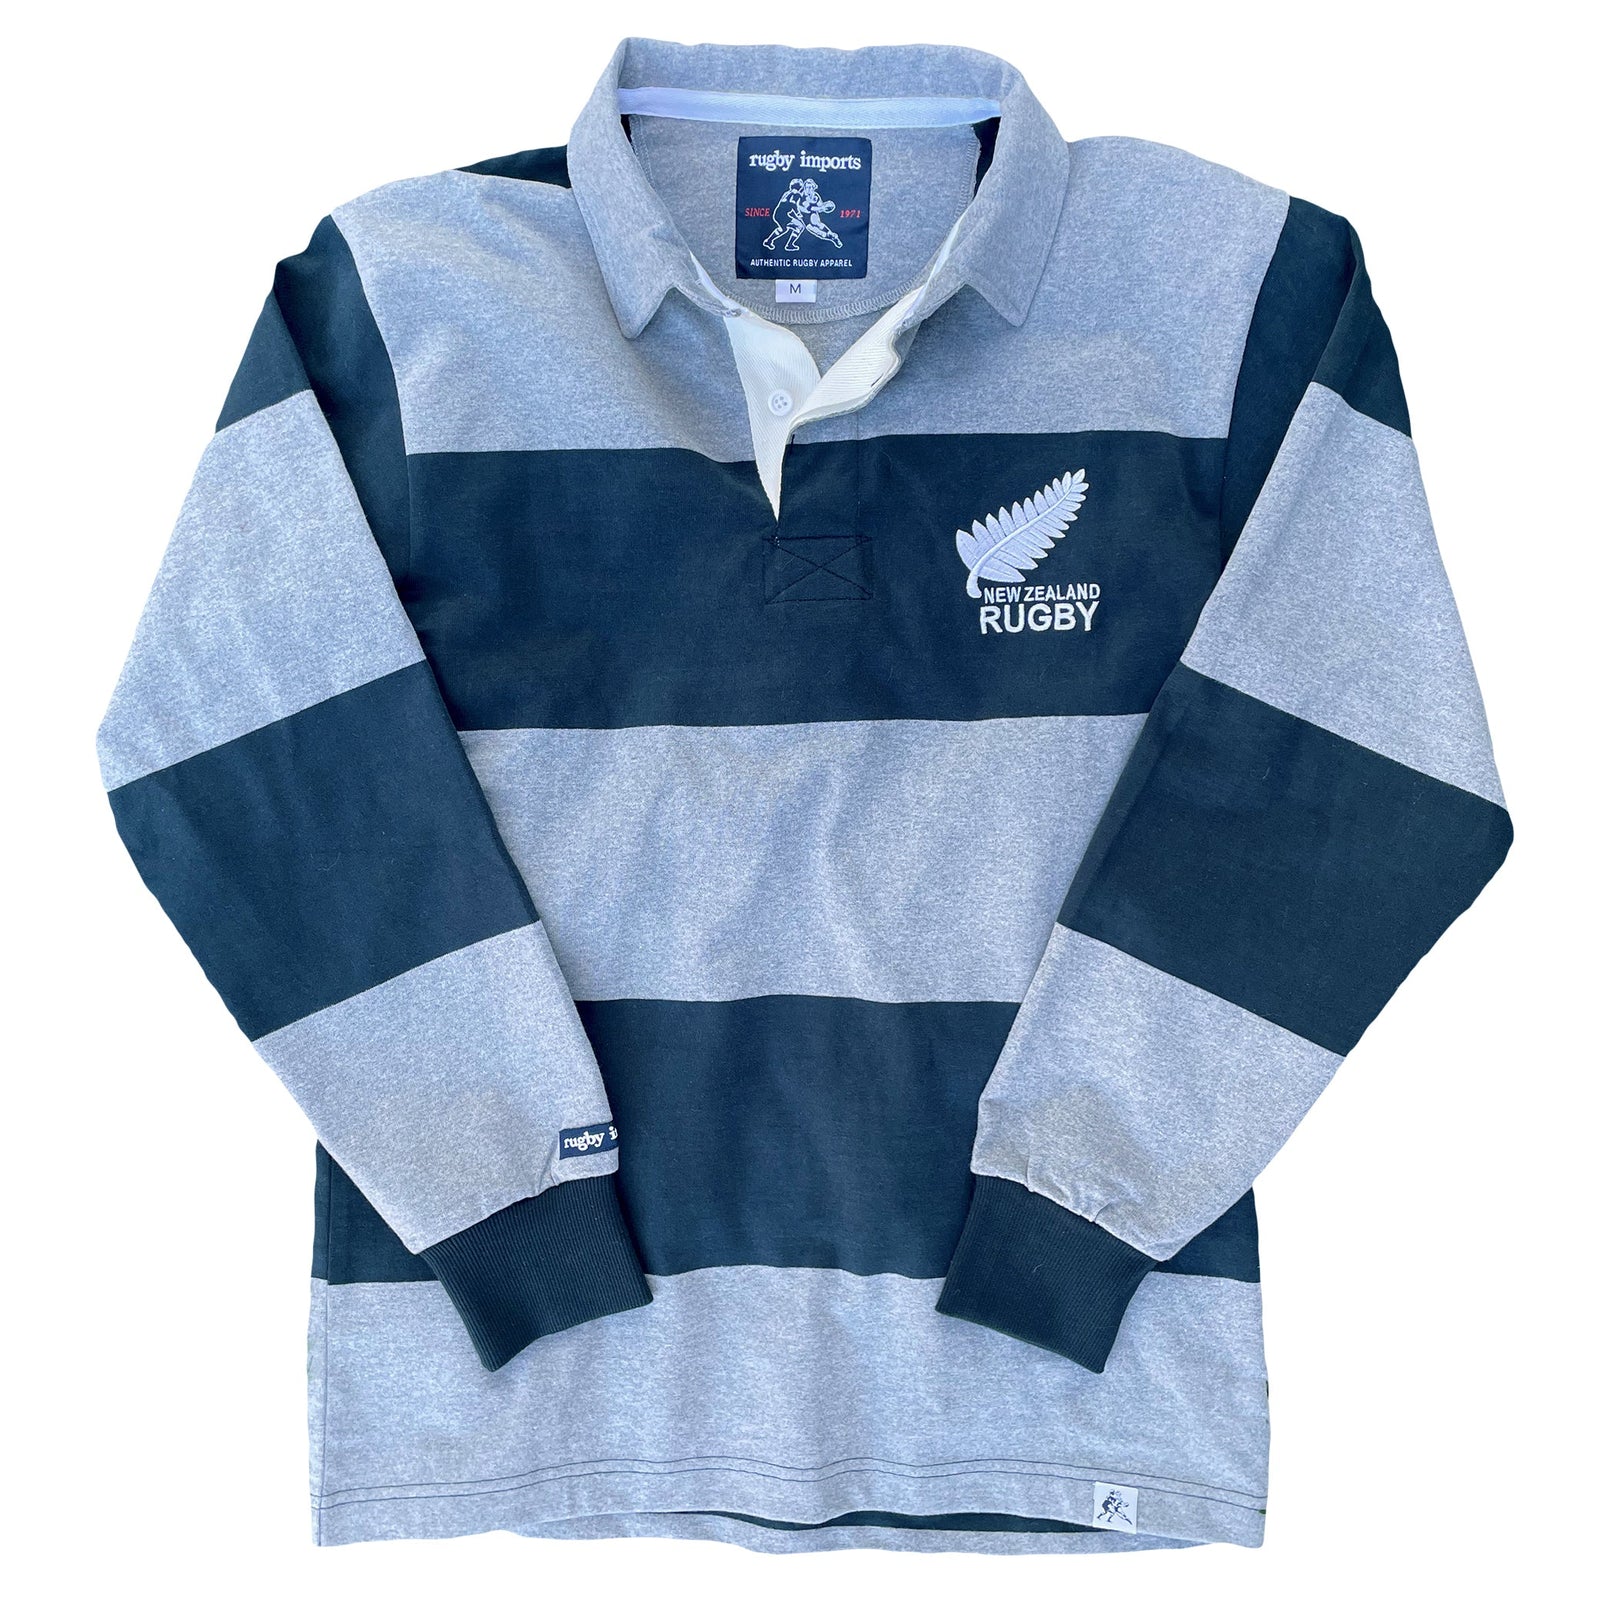 Traditional Cotton Rugby Shirts - Rugby Imports